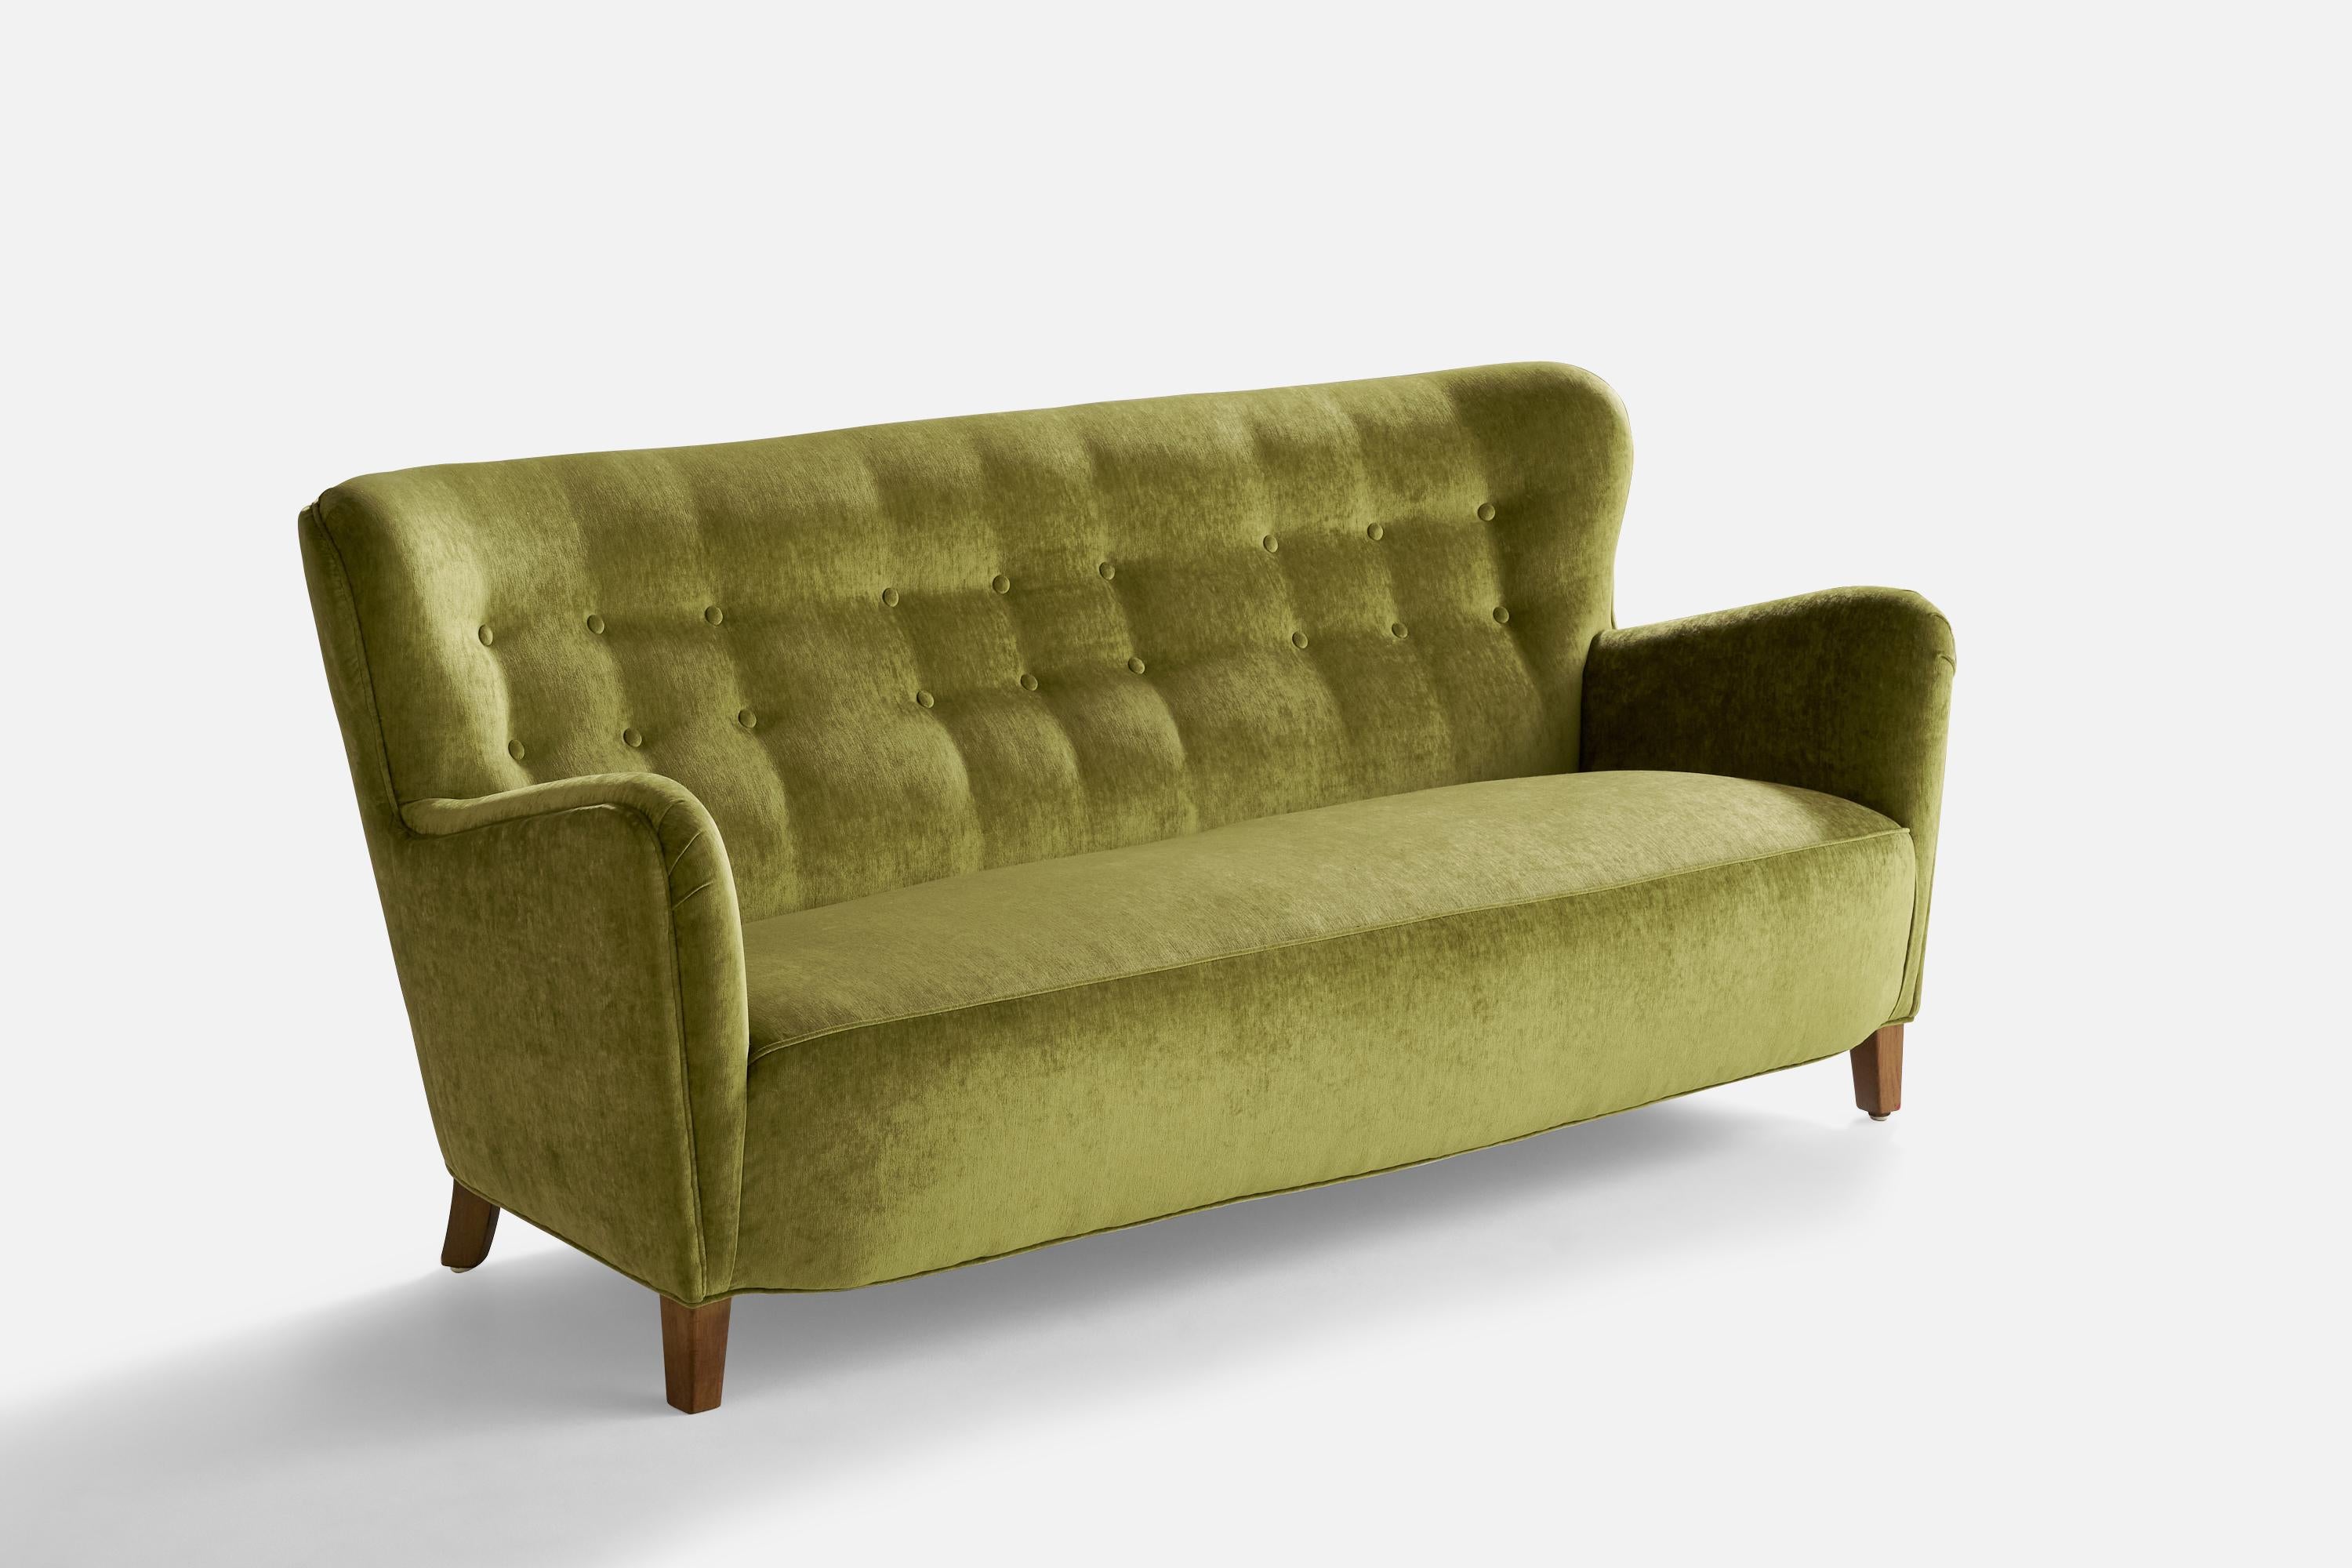 A green velvet and wood sofa designed and produced in Denmark, 1940s.

Seat height: 14.75”